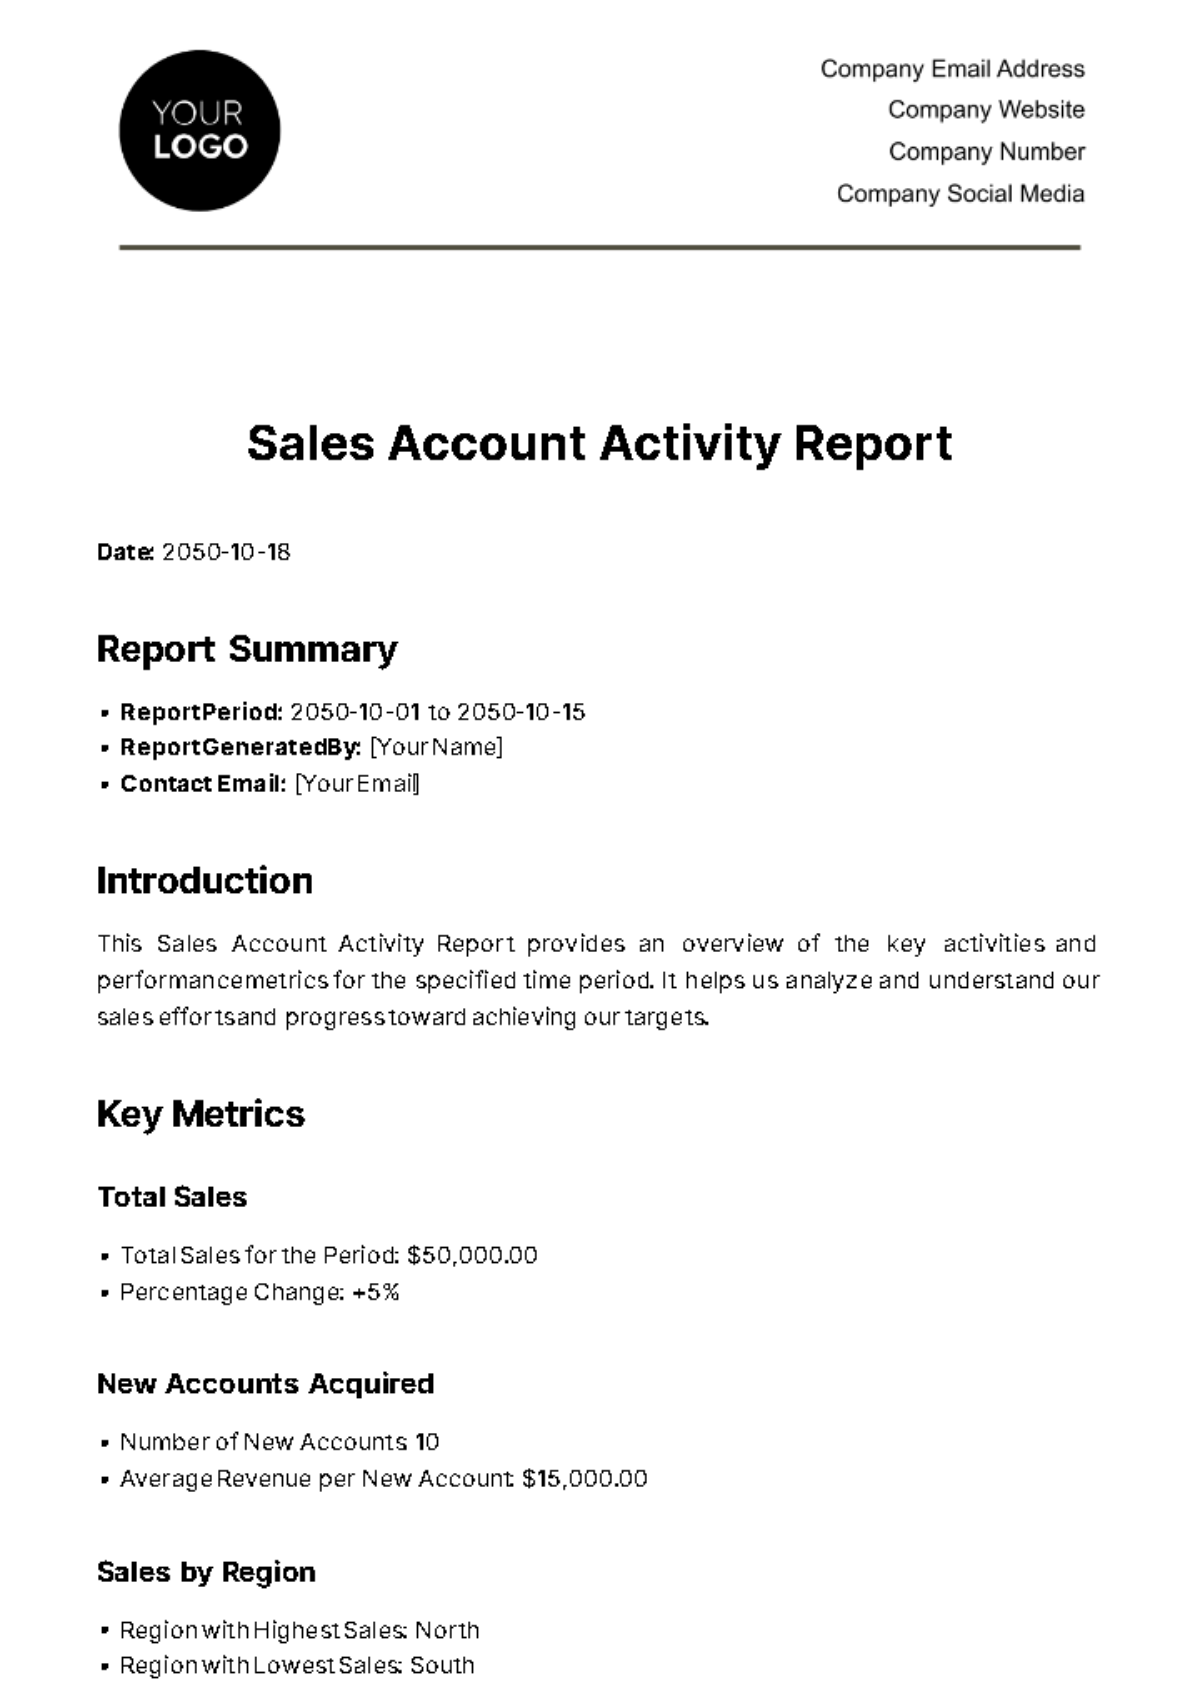 Free Sales Account Activity Report Template